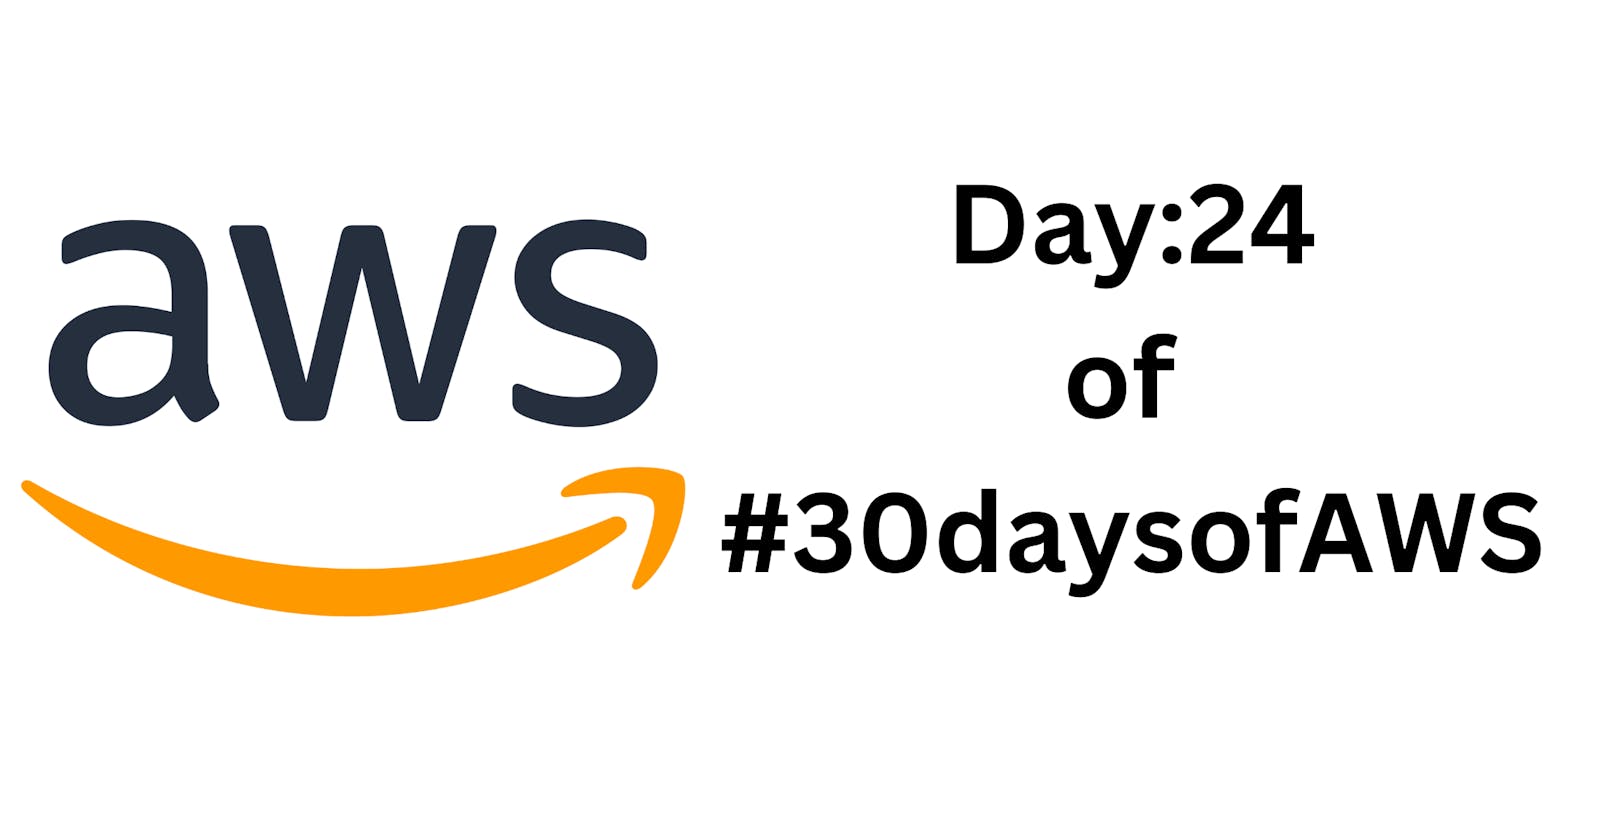 Day 24 of 30 Days of AWS: Mastering AWS Config Service! 🚀